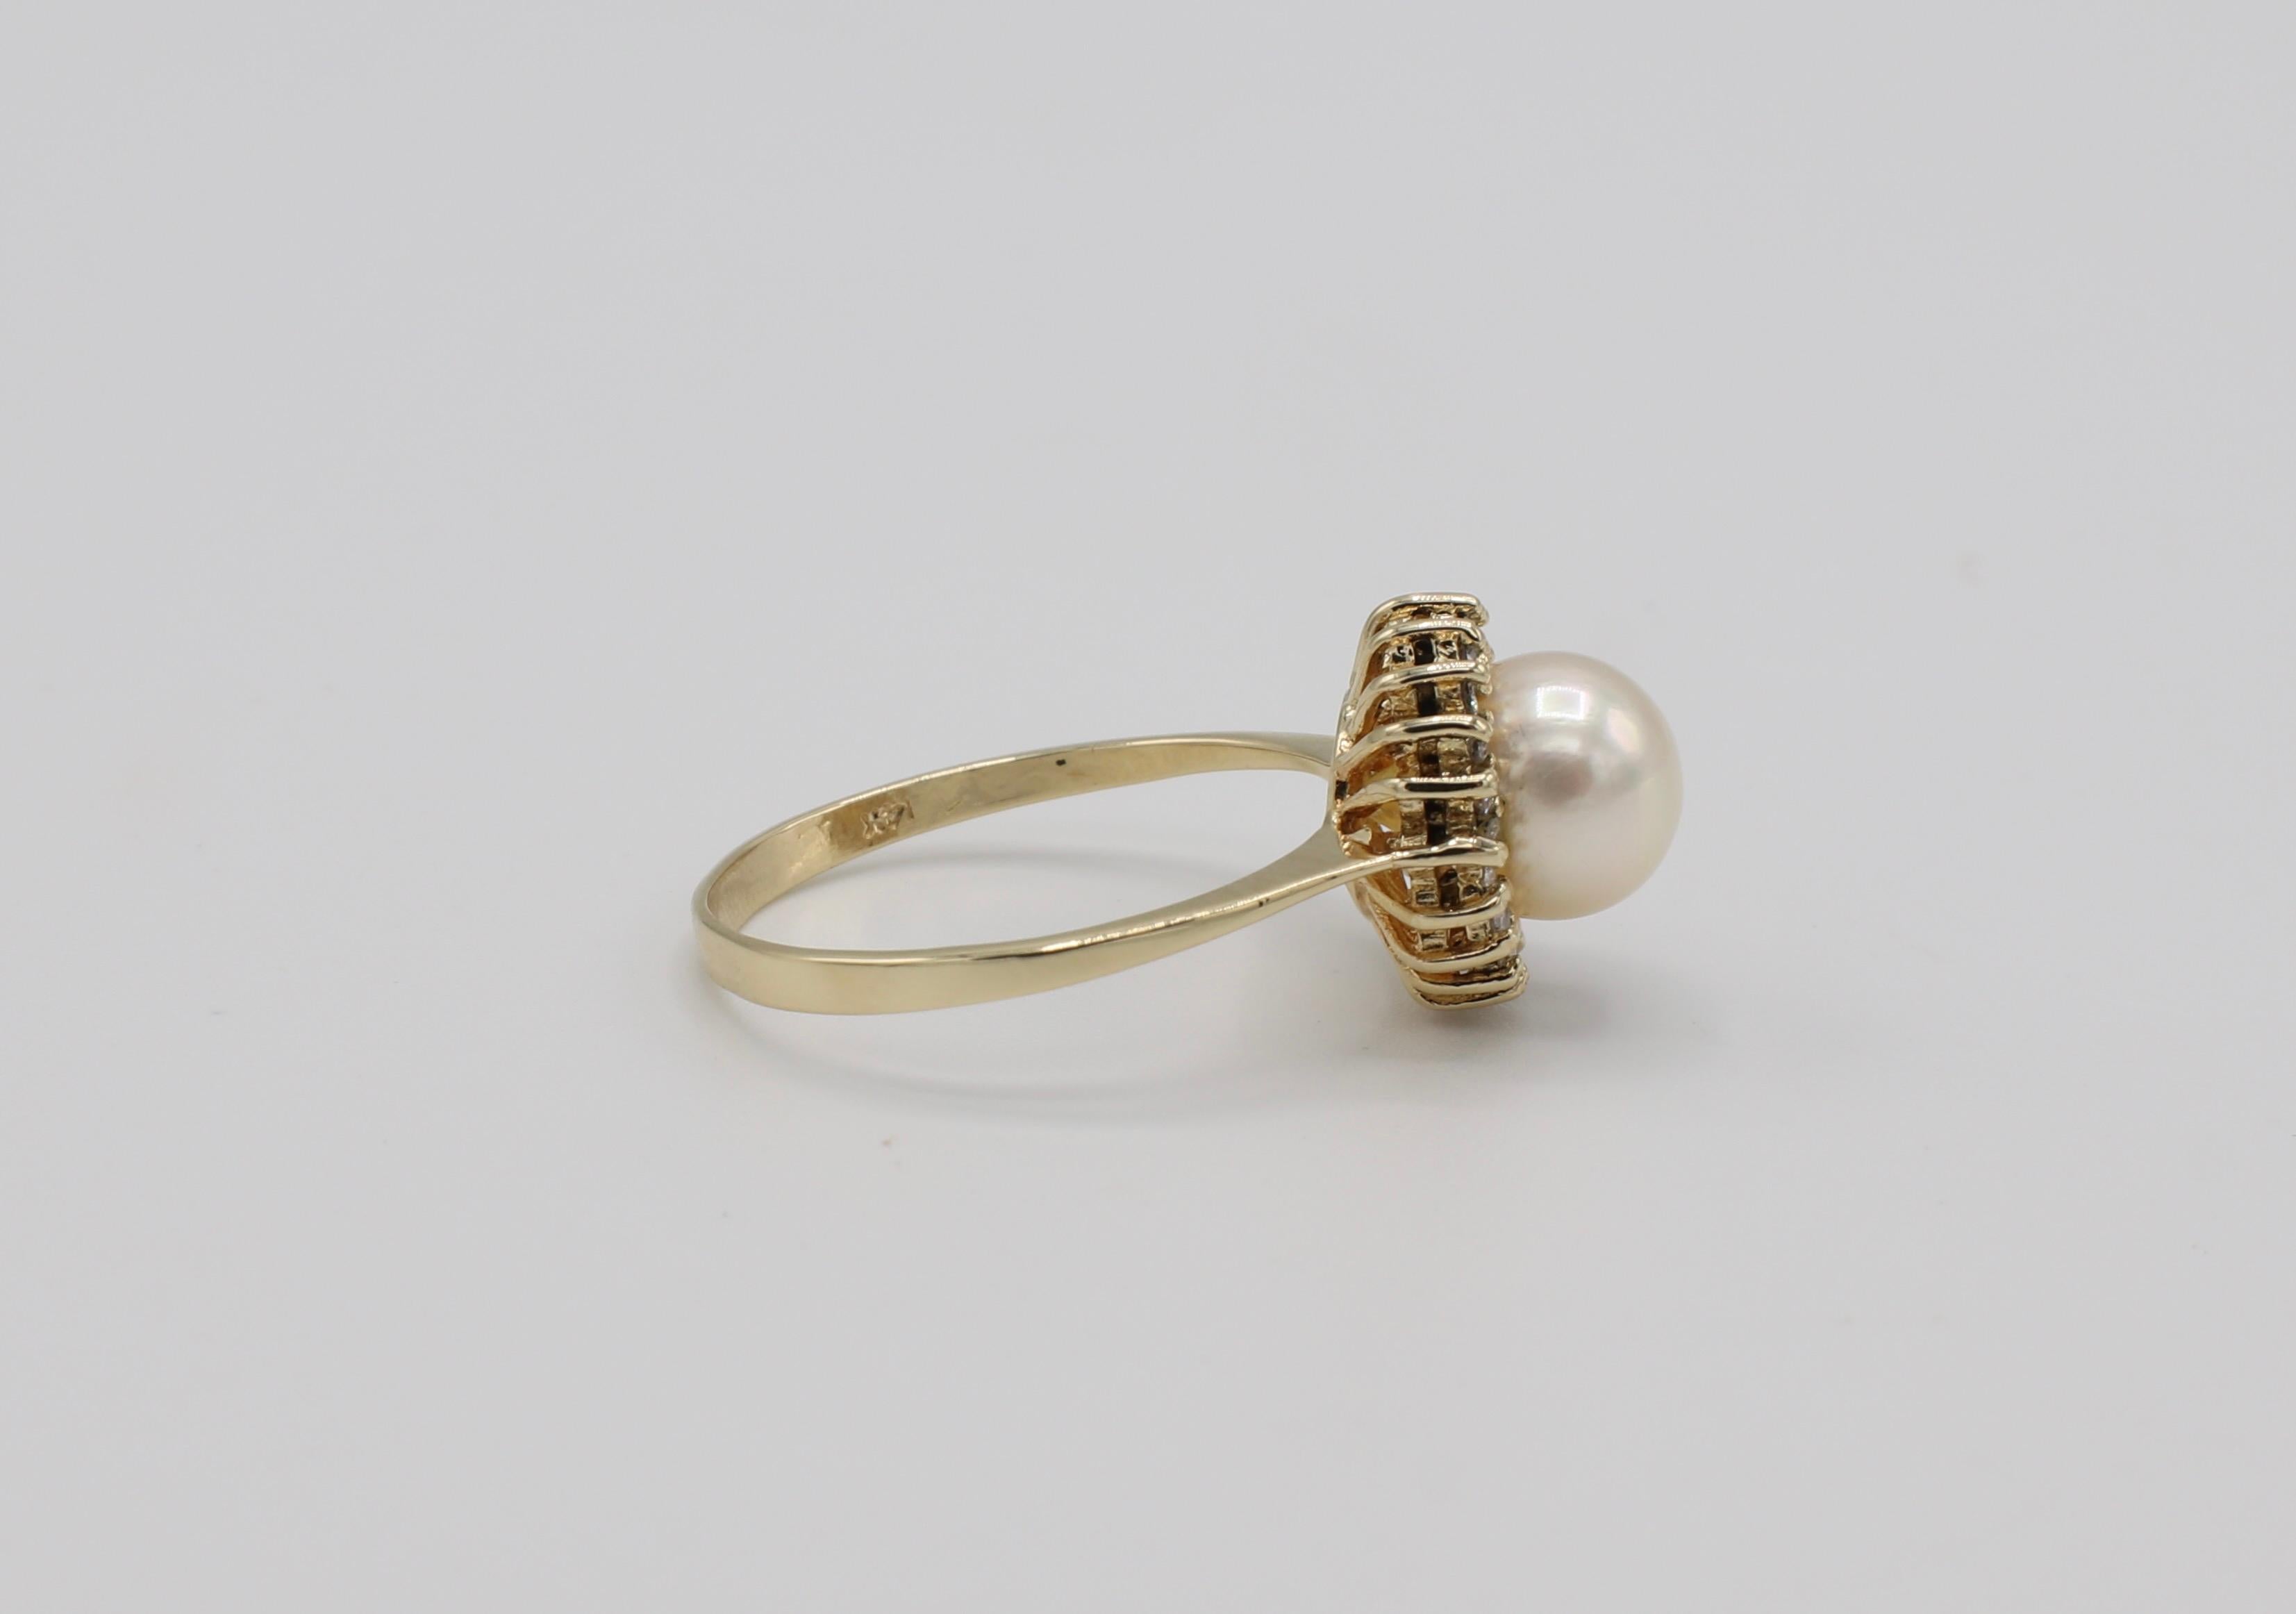 14 Karat Yellow Gold Pearl & Diamond Halo Cocktail Ring Size 7
Metal: 14k yellow gold
Weight: 2.63 grams
Pearl: 7MM, white cultured pearl, creamy luster
Diamonds: .10 CTW I SI 
Top of ring measures 11MM diameter 
Band is 1.6MM wide at base 
Size 7